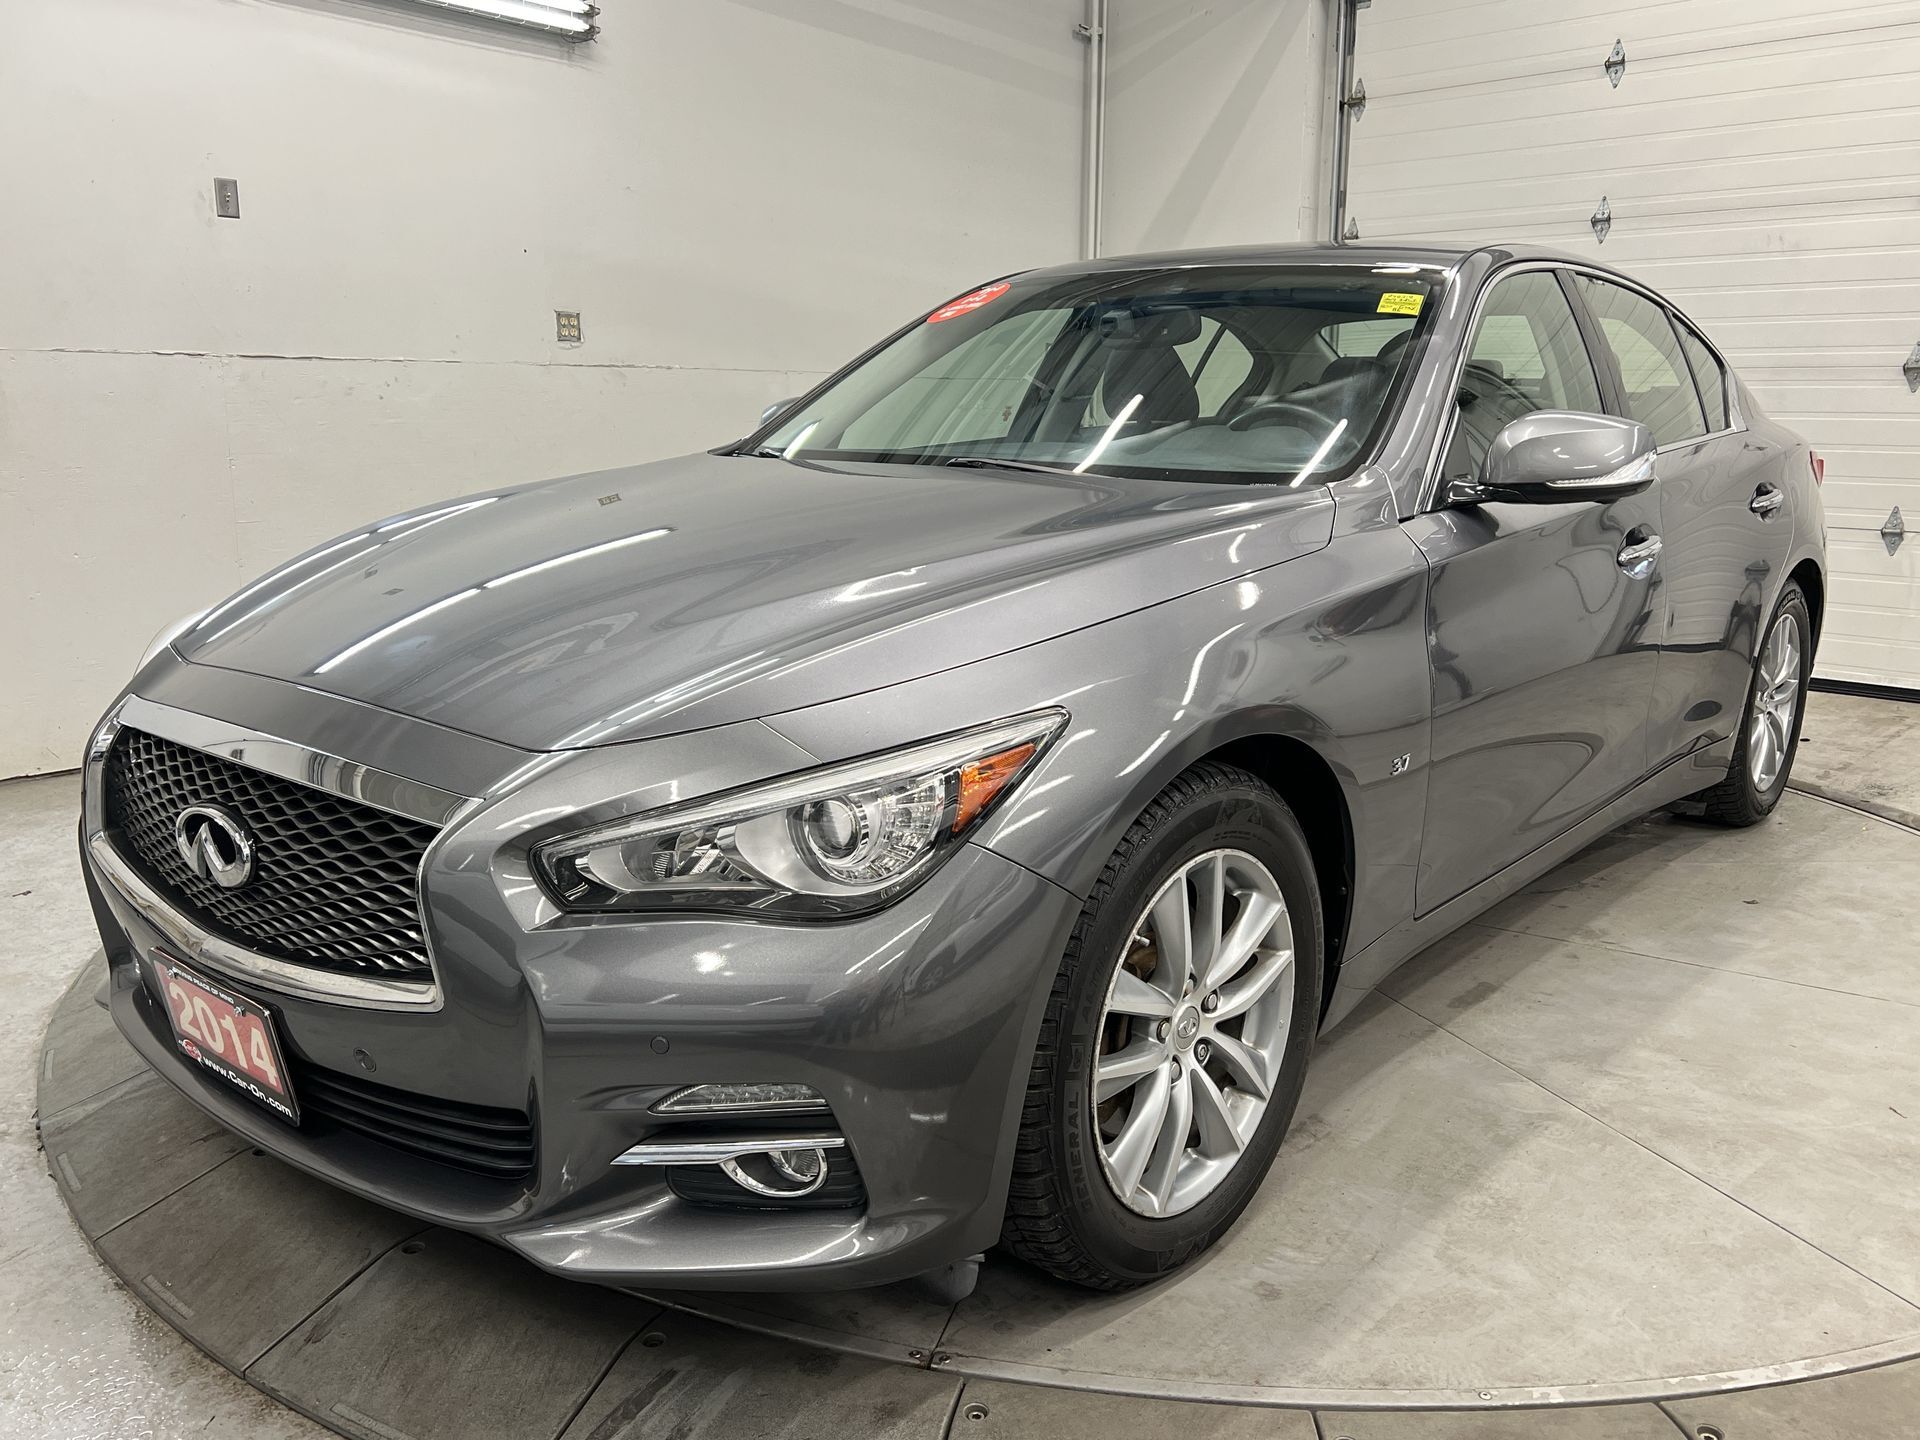 2014 Infiniti Q50 DELUXE TOURING AWD| 360 CAM | BLIND SPOT | LOADED!